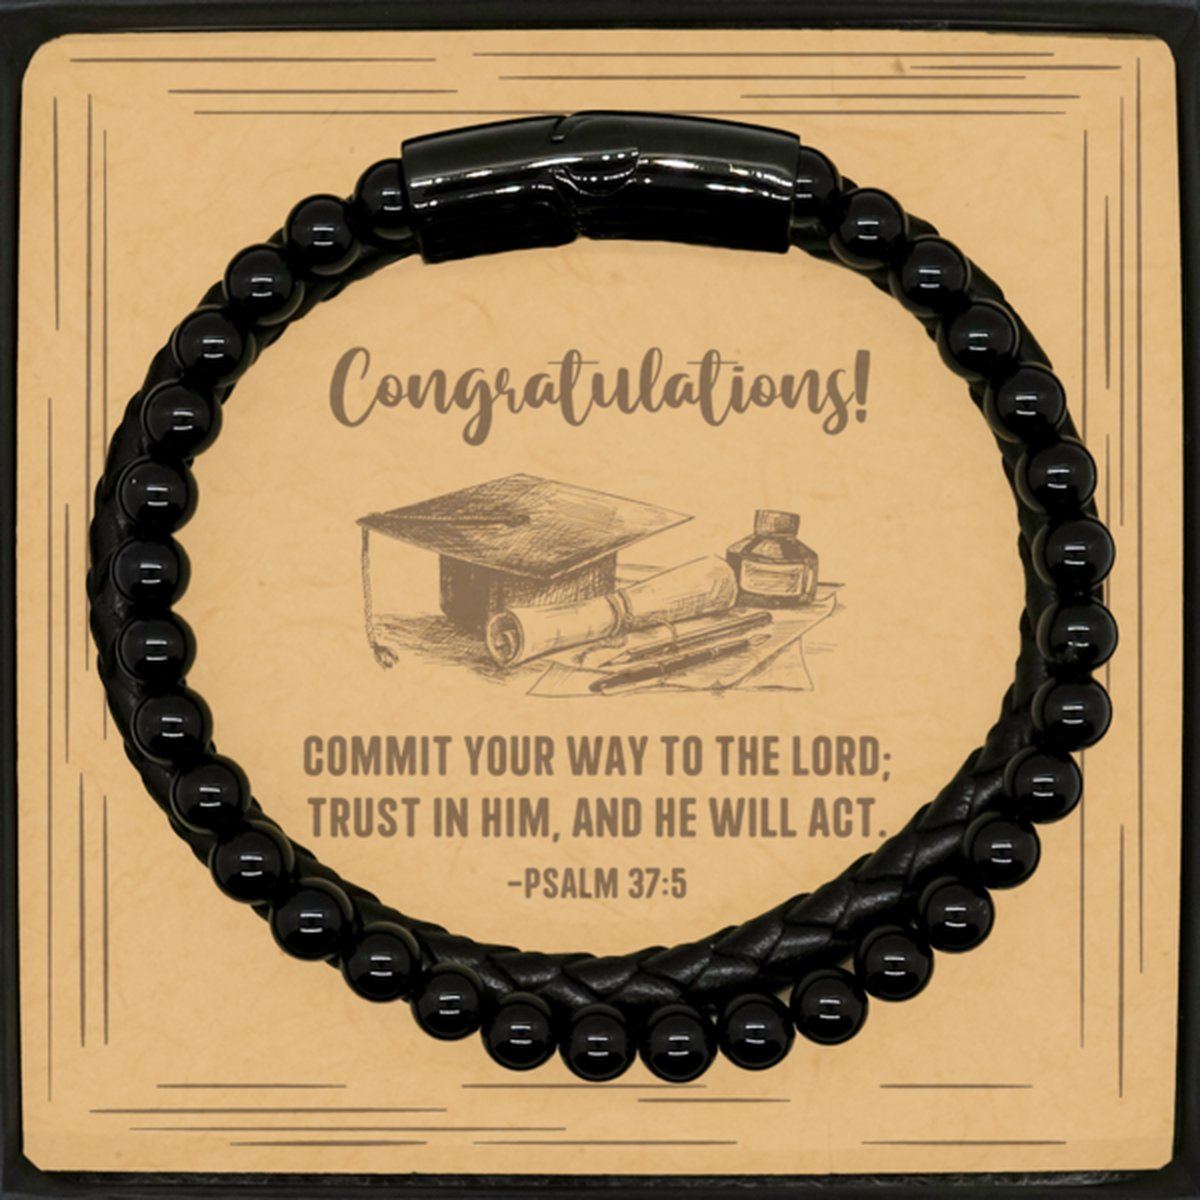 Religious Graduation Cards, Commit your way to the Lord, Bible Verse Stone Leather Bracelet, Christian Graduation Gifts